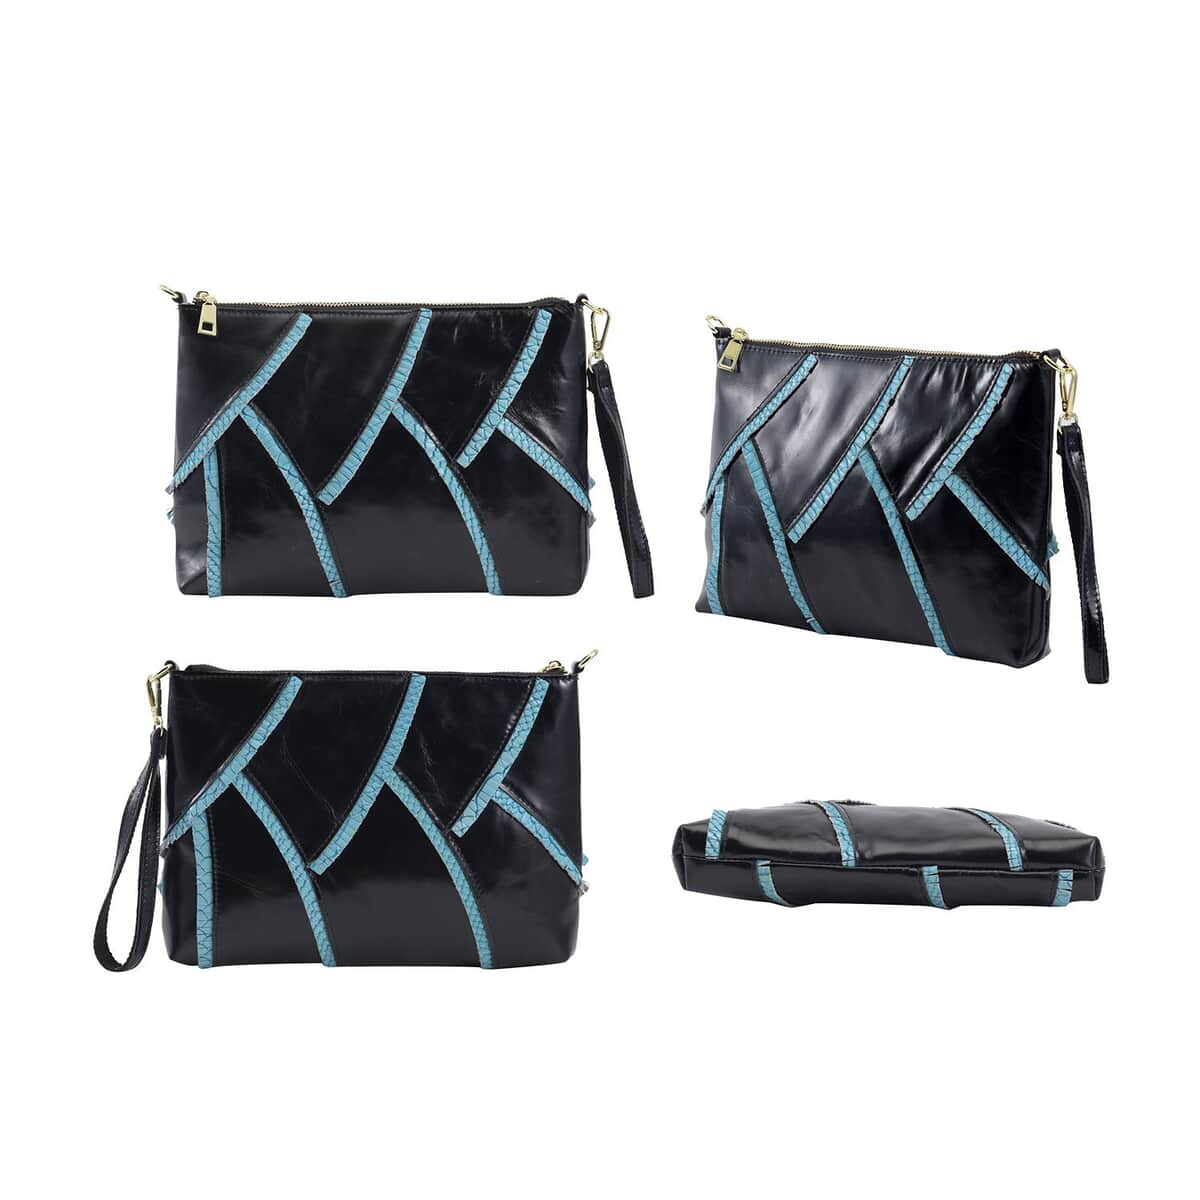 Black and Blue Genuine Leather Fish Scale Design Clutch Bag (11.02"x1.38"x7.87") with Long Strap image number 3